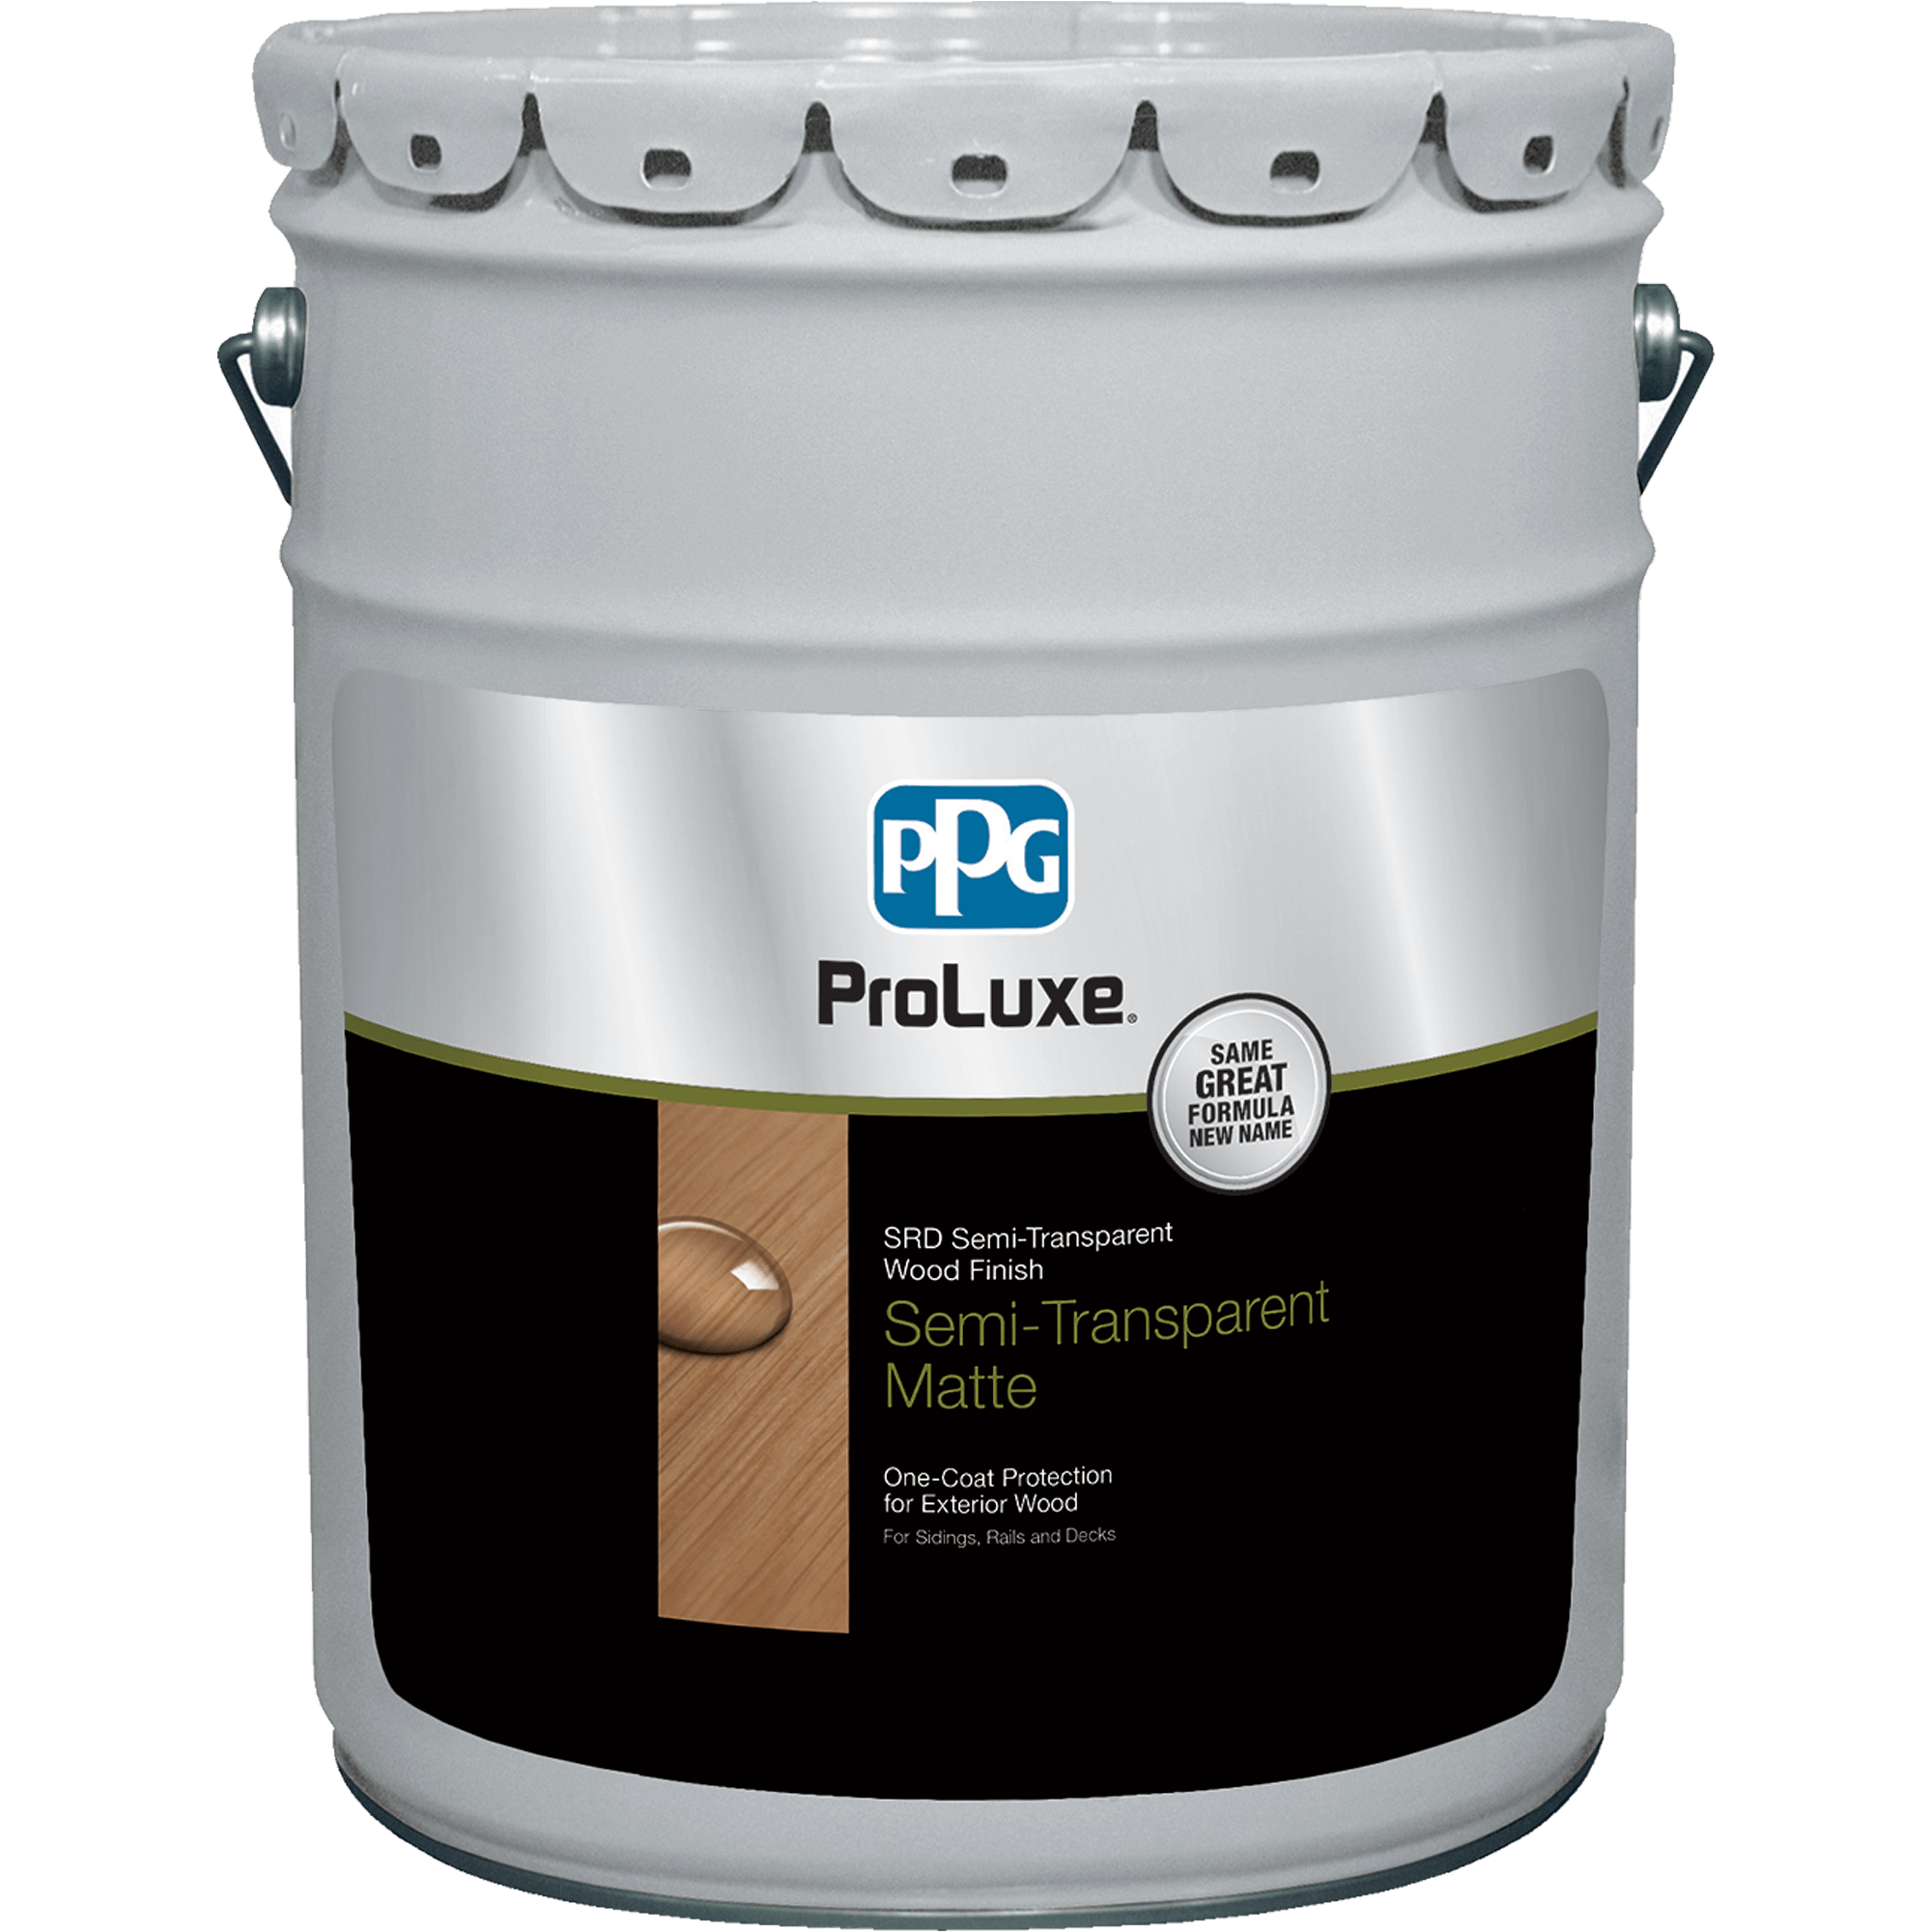 PROLUXE SRD Semi-Transparent Wood Finish Professional Quality Paint  Products PPG